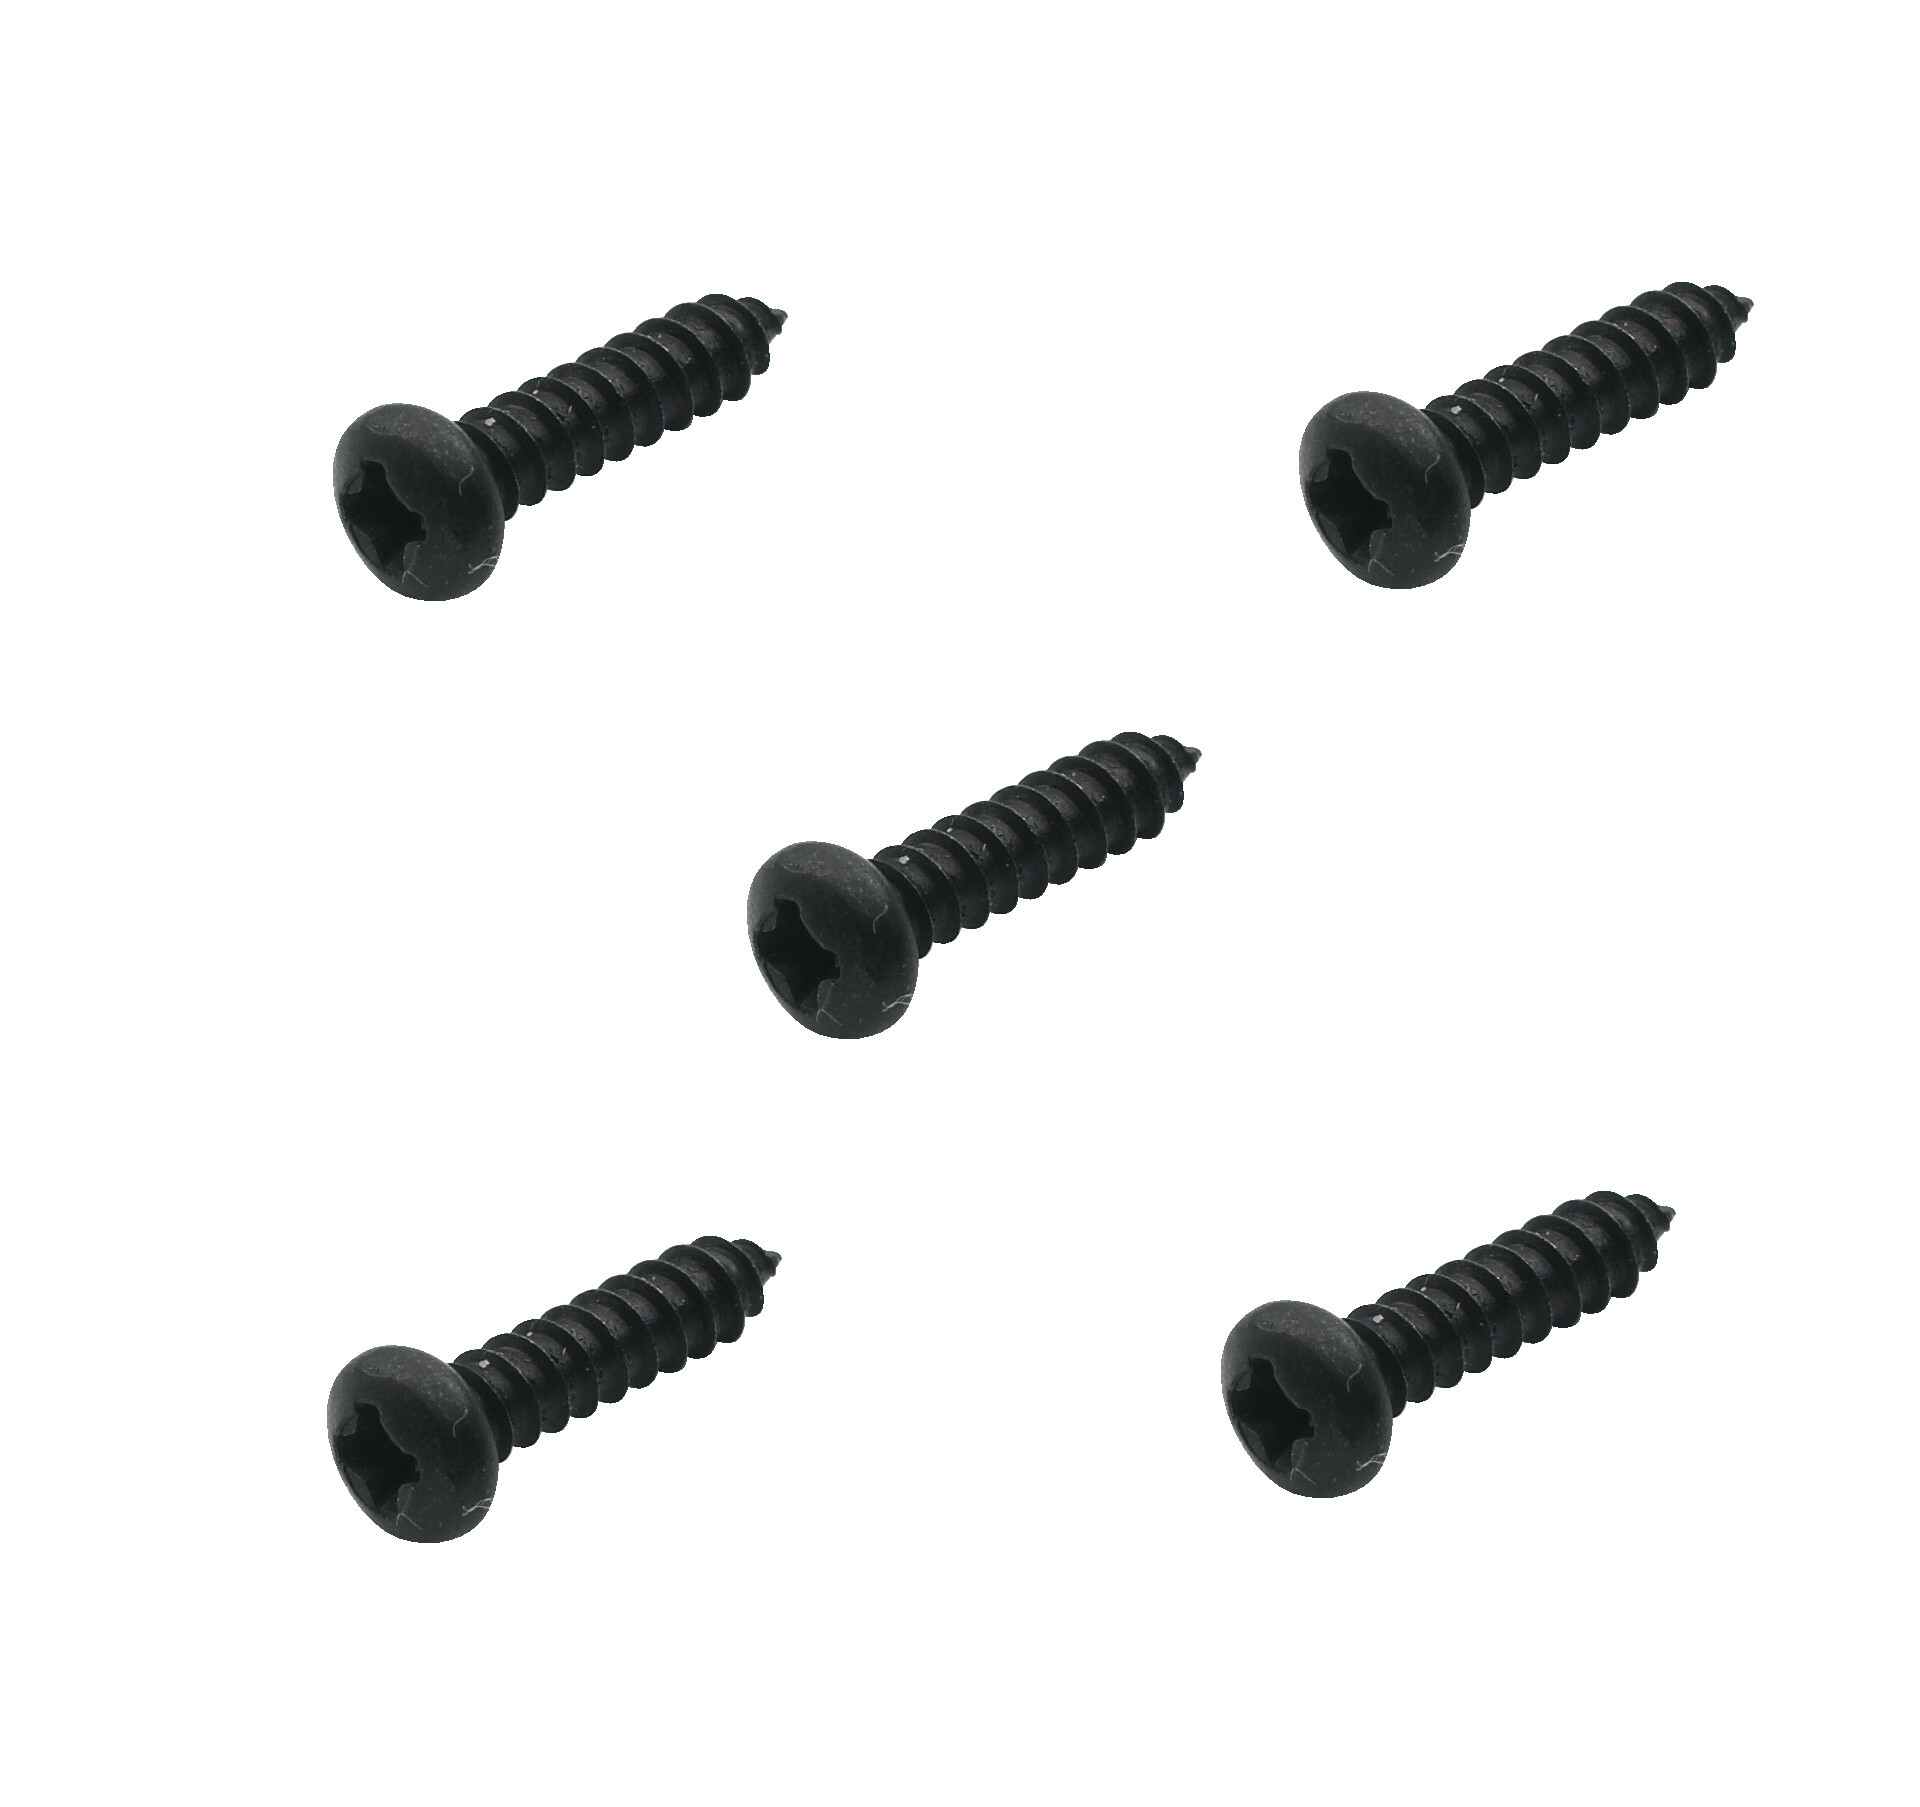 Framus & Warwick Parts - Screw for Easy-Access Electronics Compartment Covers, 5 pcs.